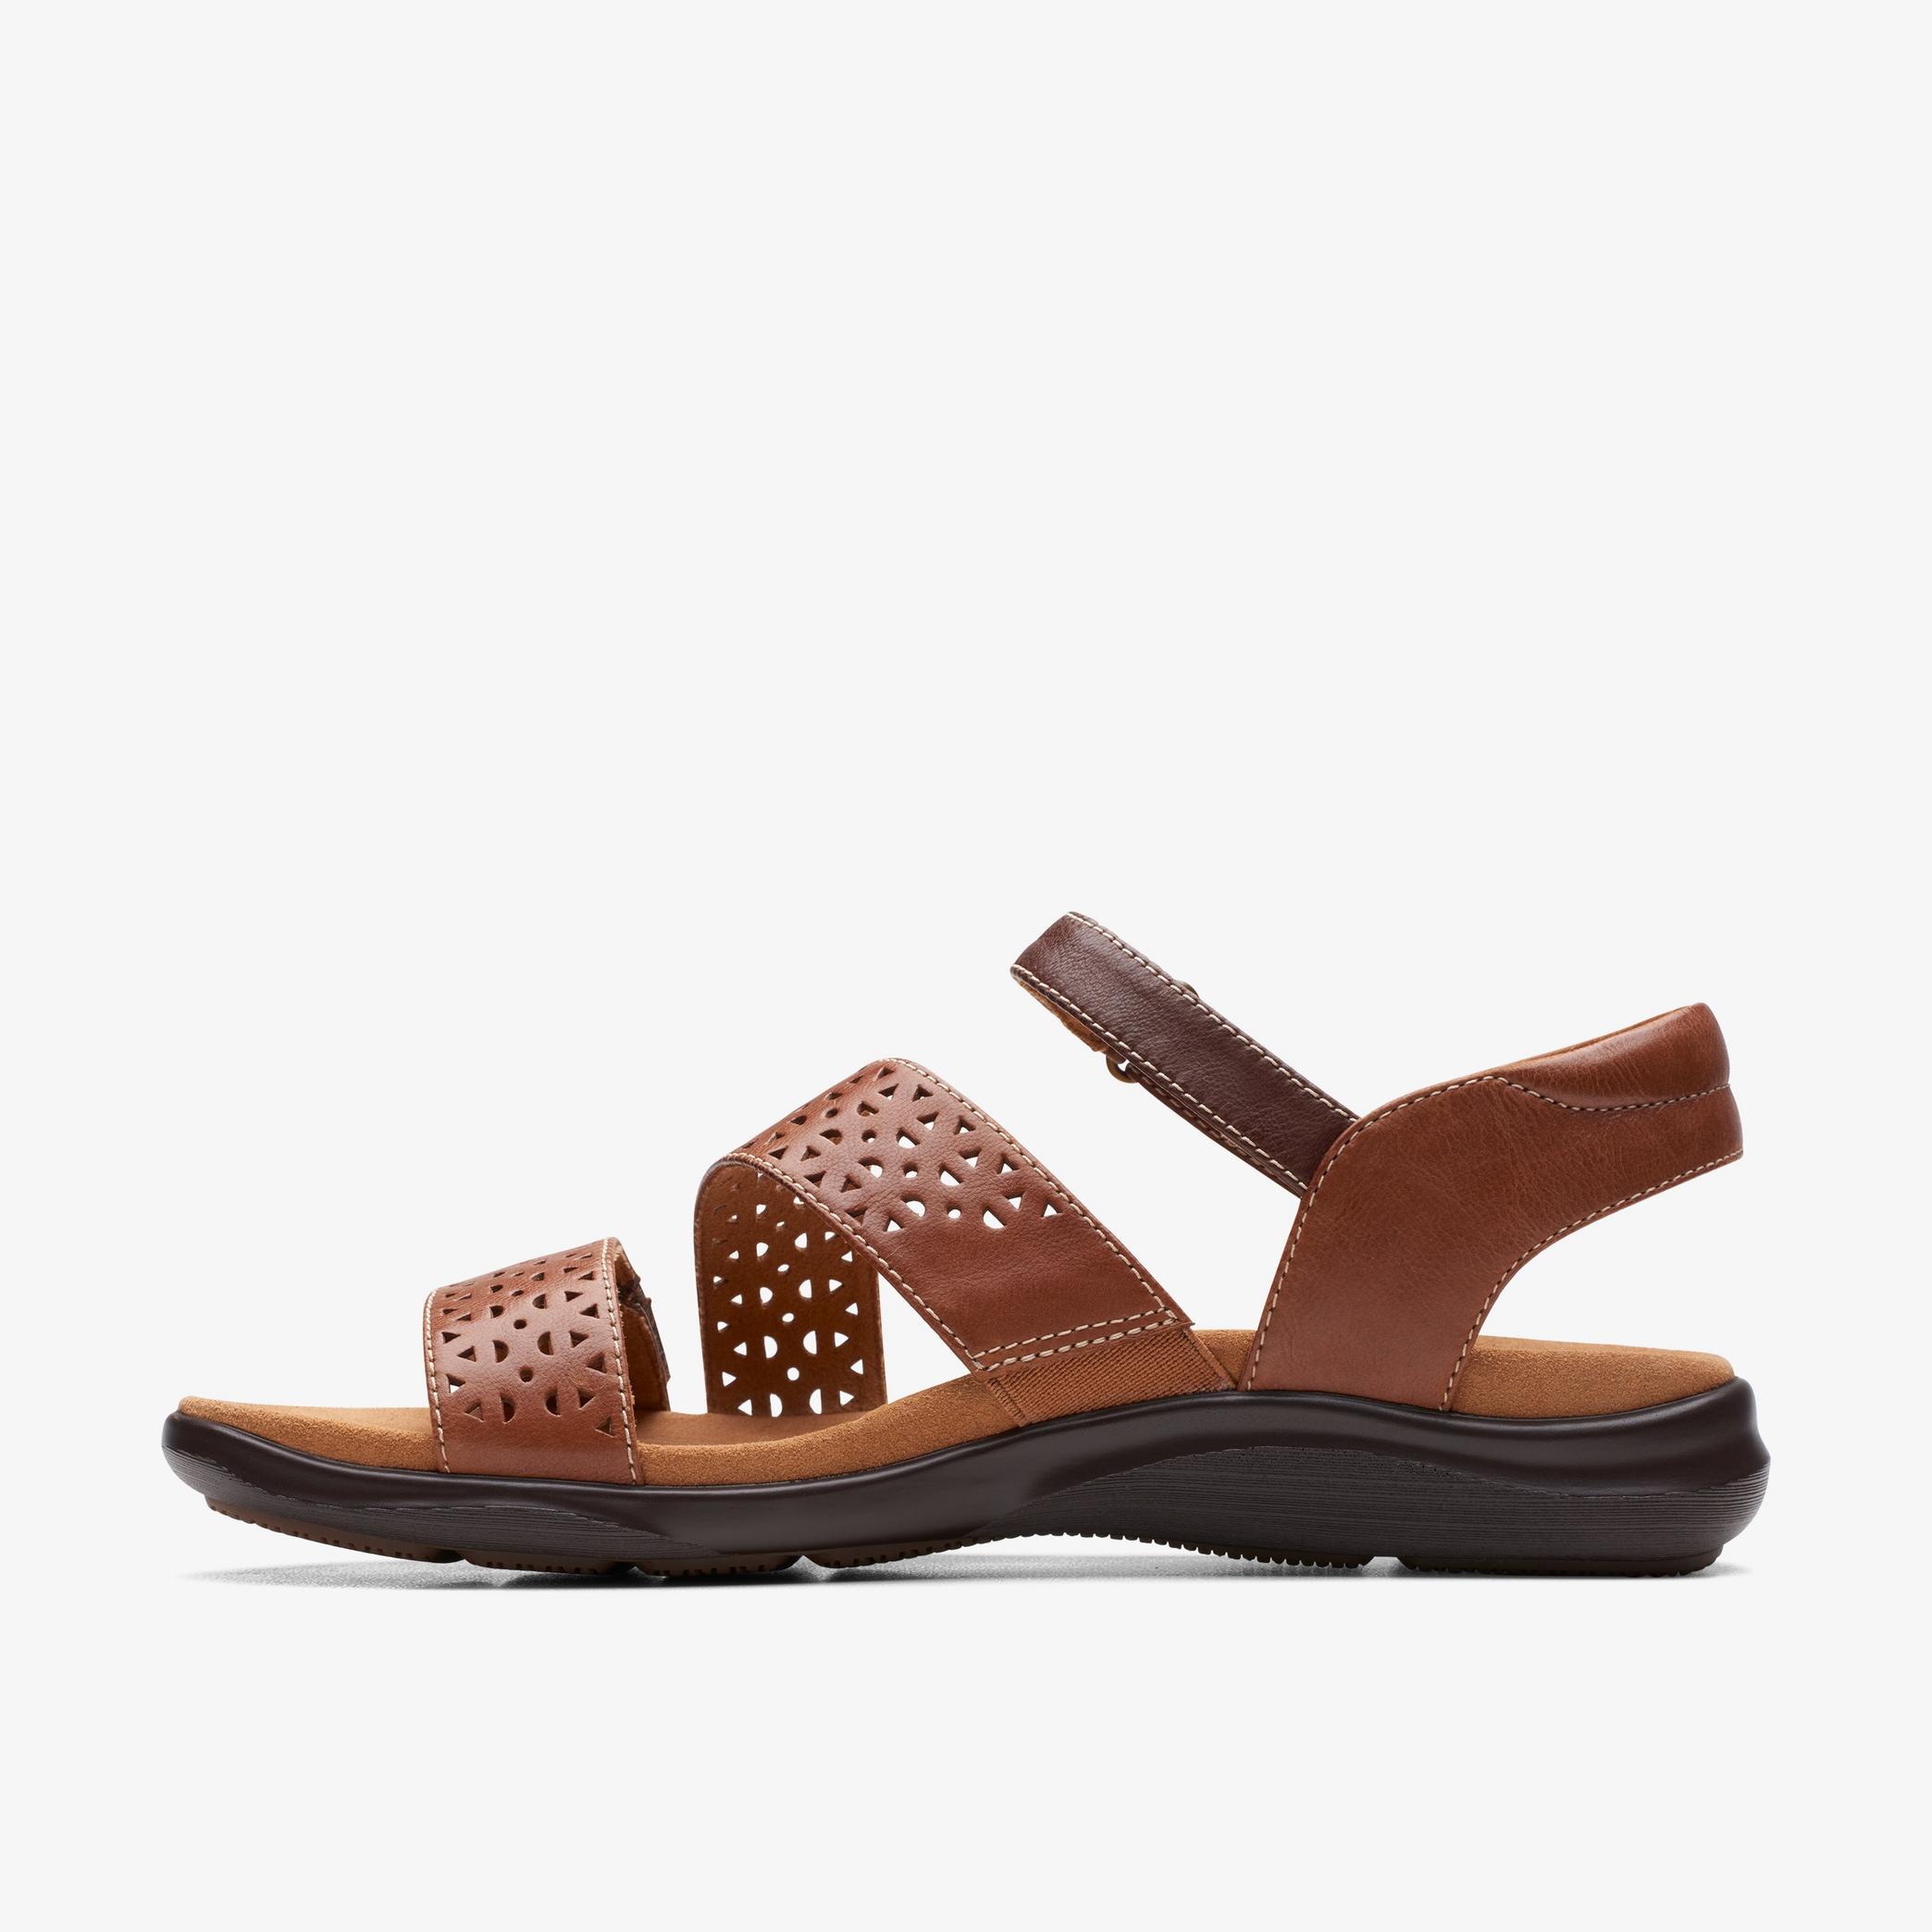 WOMENS Kitly Way Tan Leather Flat Sandals | Clarks US